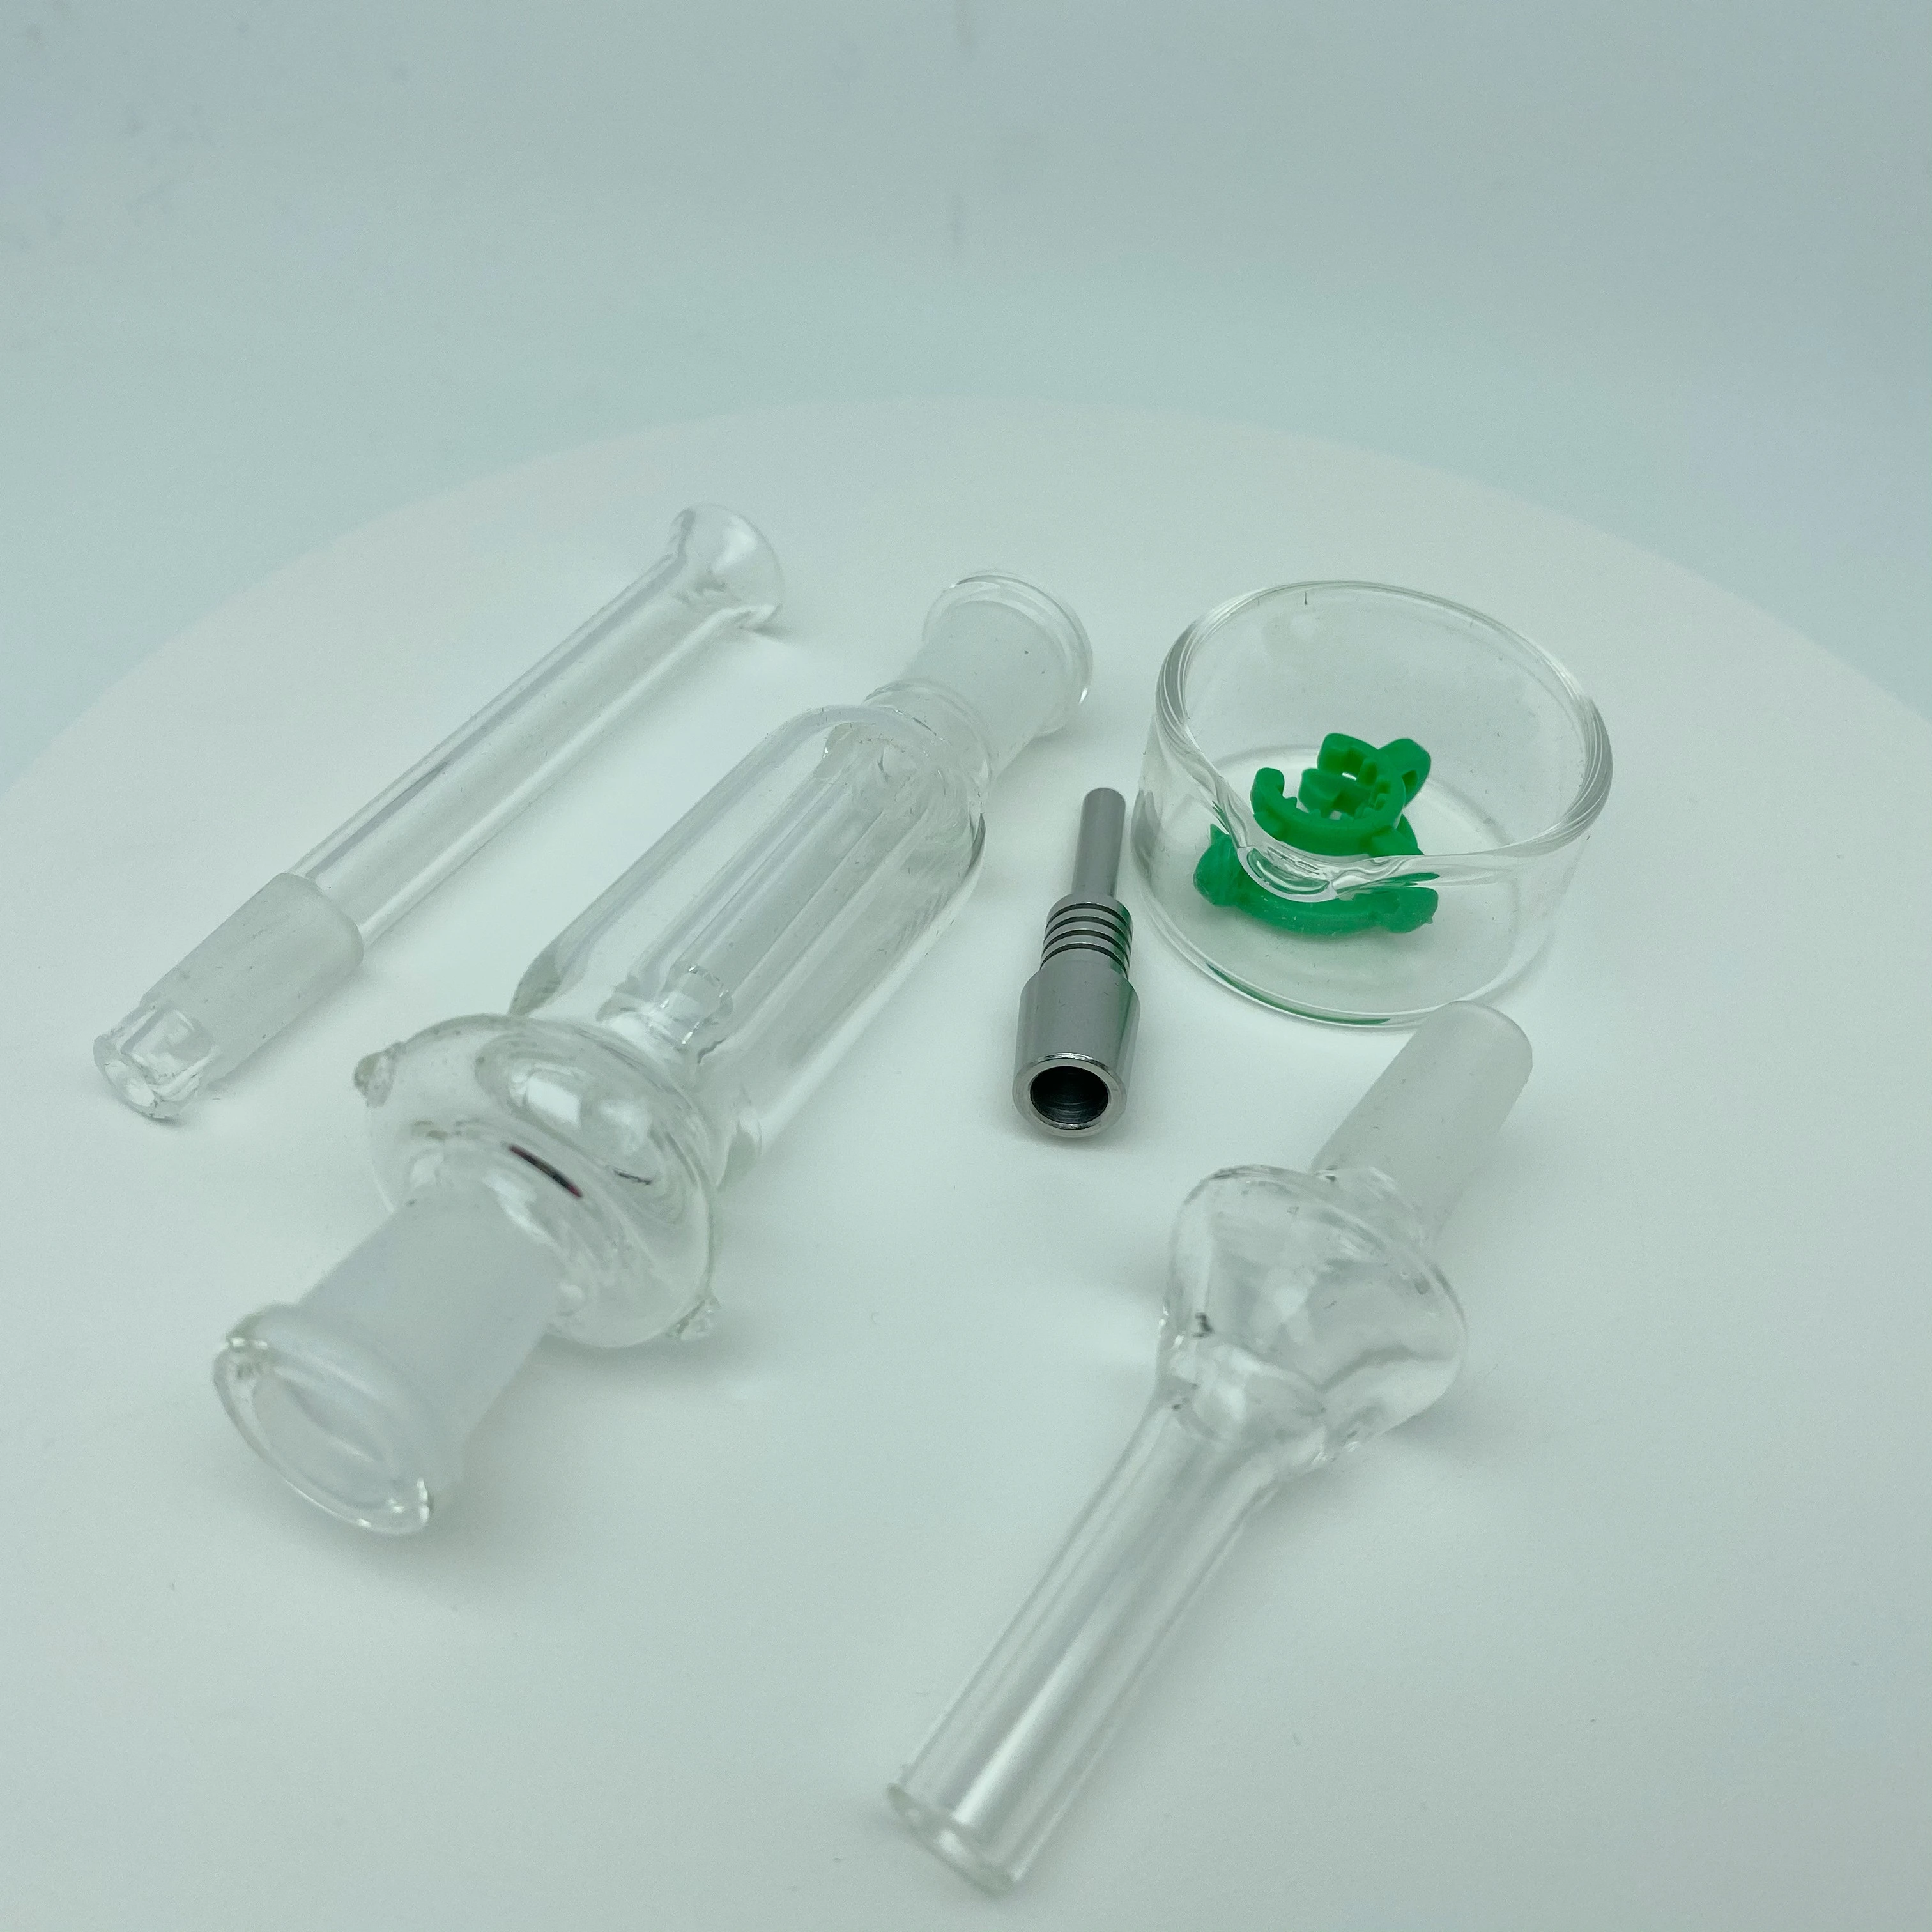 Hot selling mini glass and smoking sets NC pipes collectors with 10mm titanium nail  in 2021